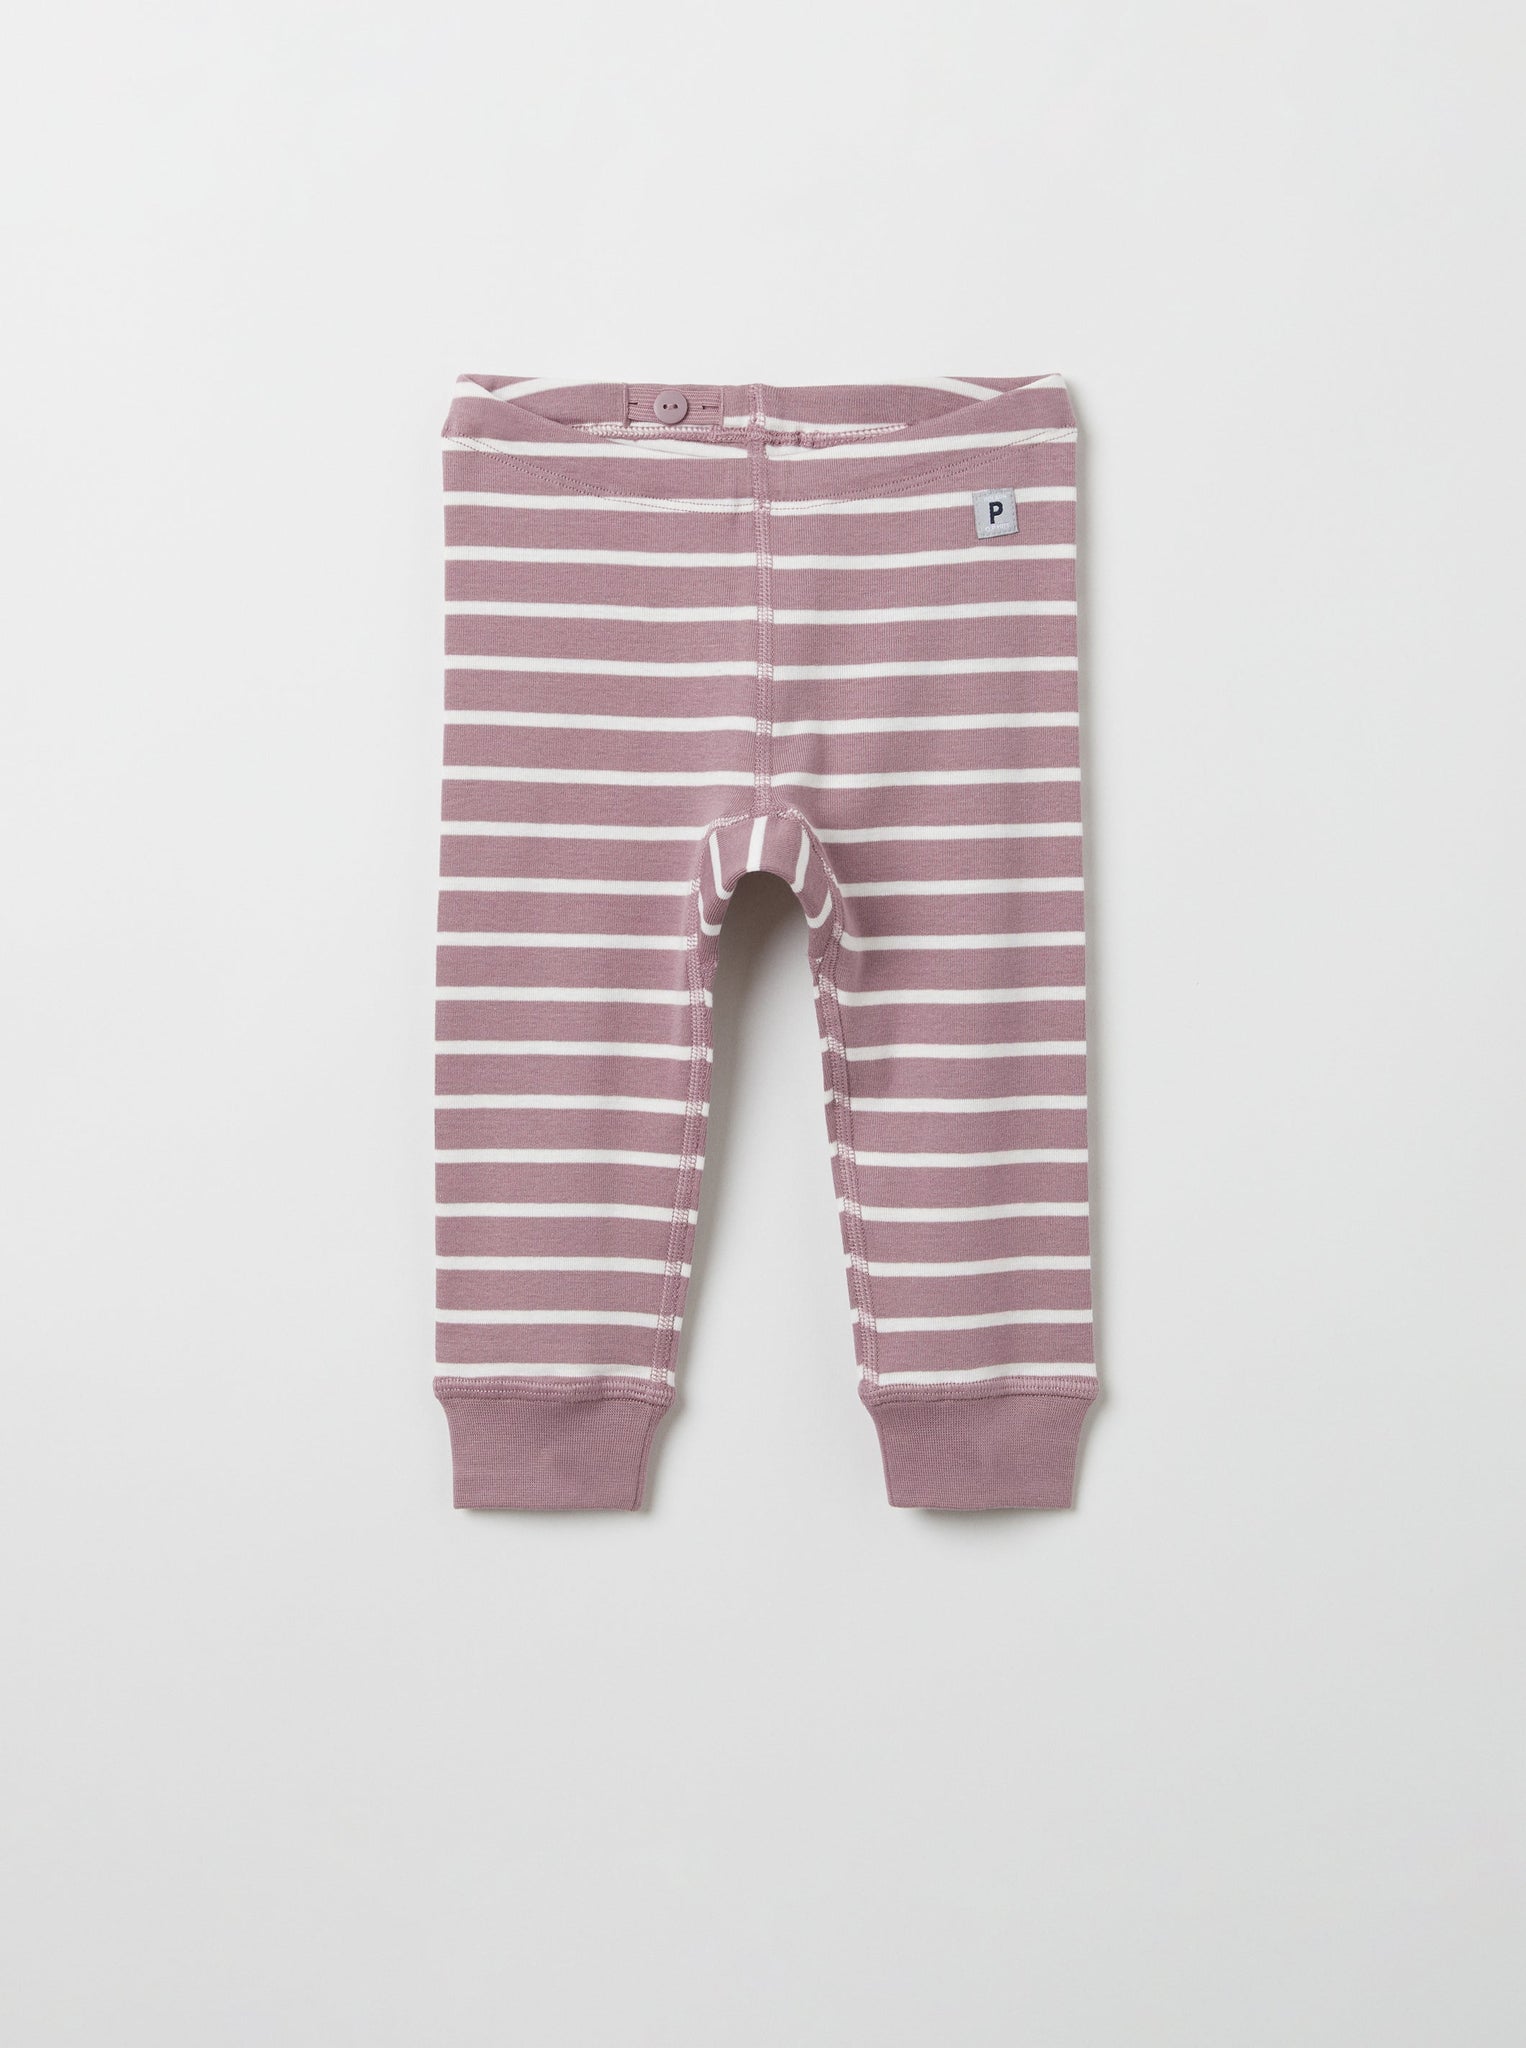 Organic Cotton Purple Baby Leggings from the Polarn O. Pyret babywear collection. Nordic kids clothes made from sustainable sources.